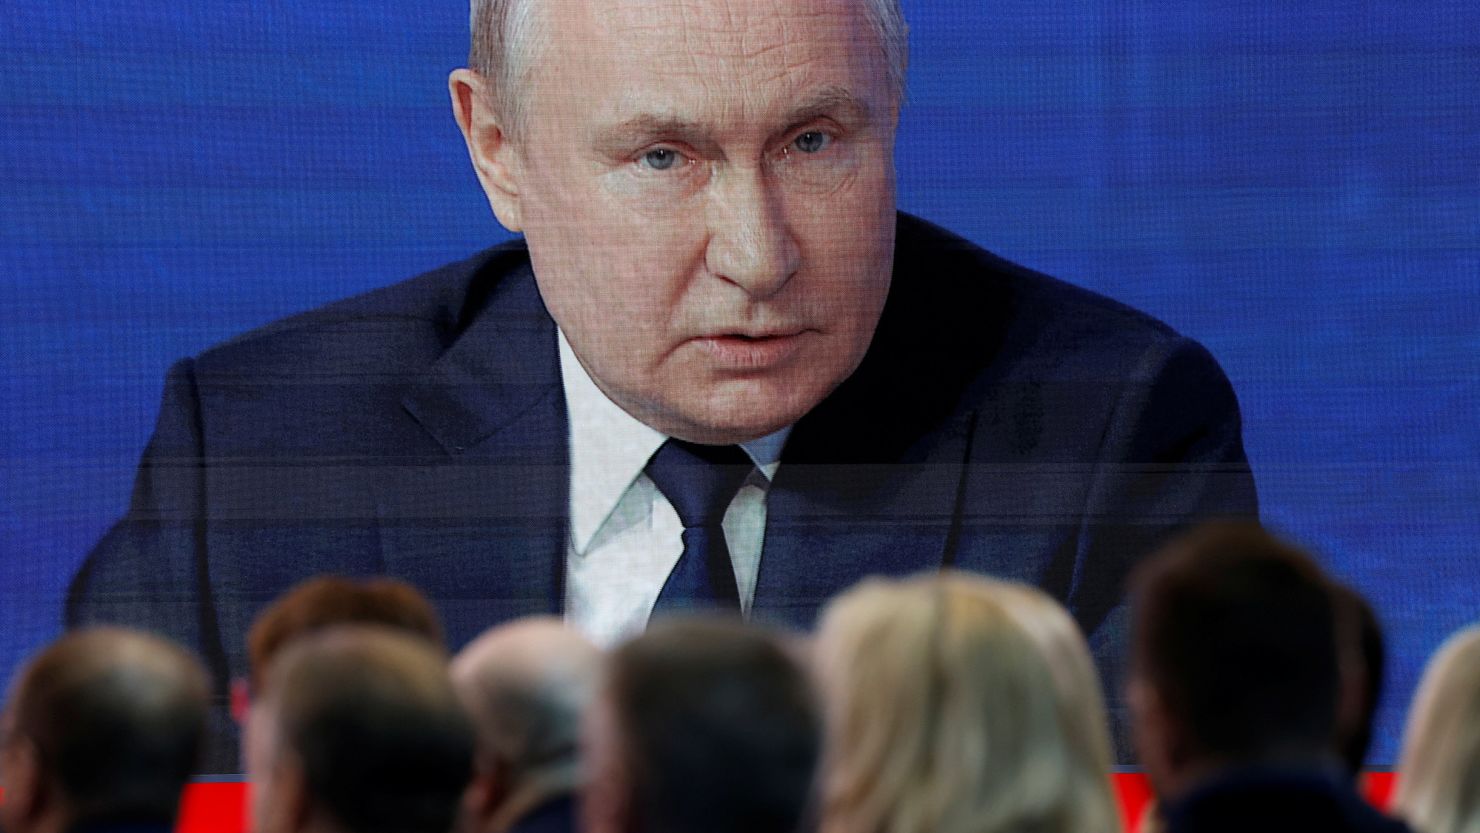 Russia's presidential election is all but certain to extend Vladimir Putin's rule throughout this decade and into the 2030s.